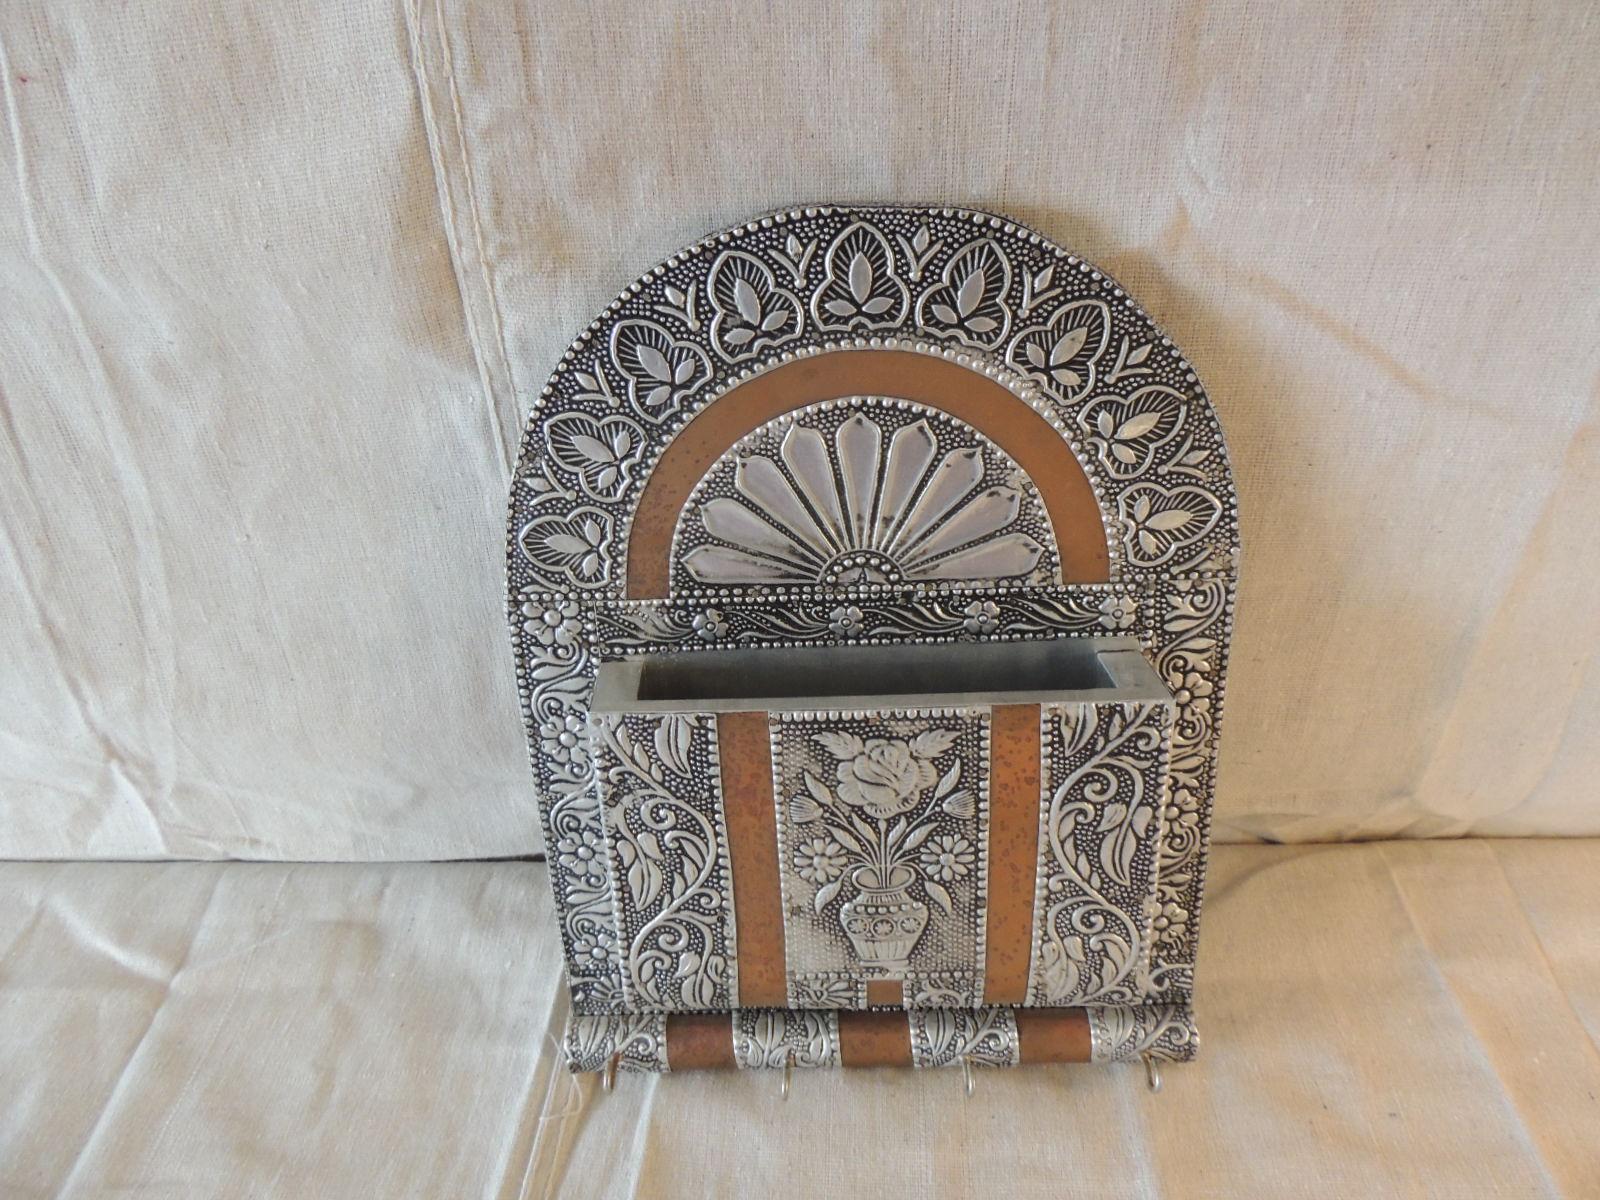 Indian repousse letters and keys tin and wood wall caddy
Size: 9